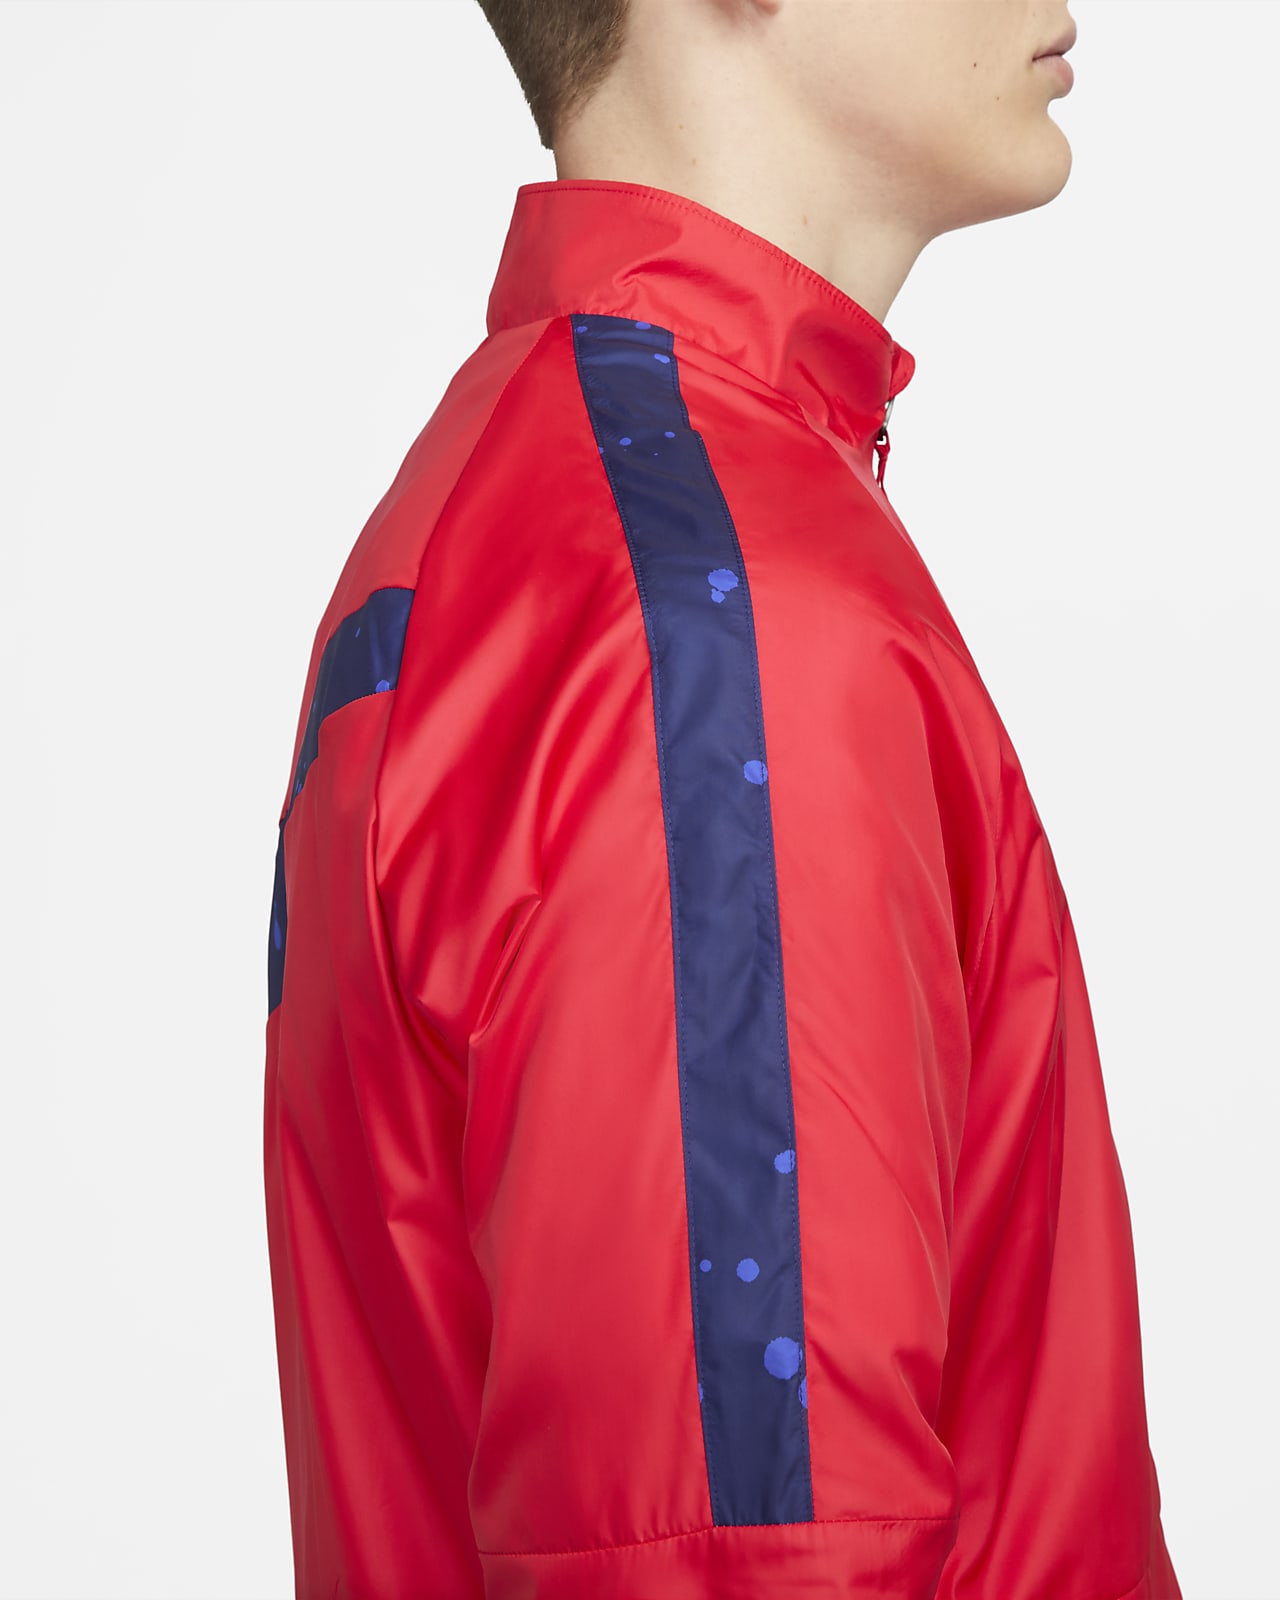 Nike Youth USA Full-Zip Repel Academy AWF Jacket - Red